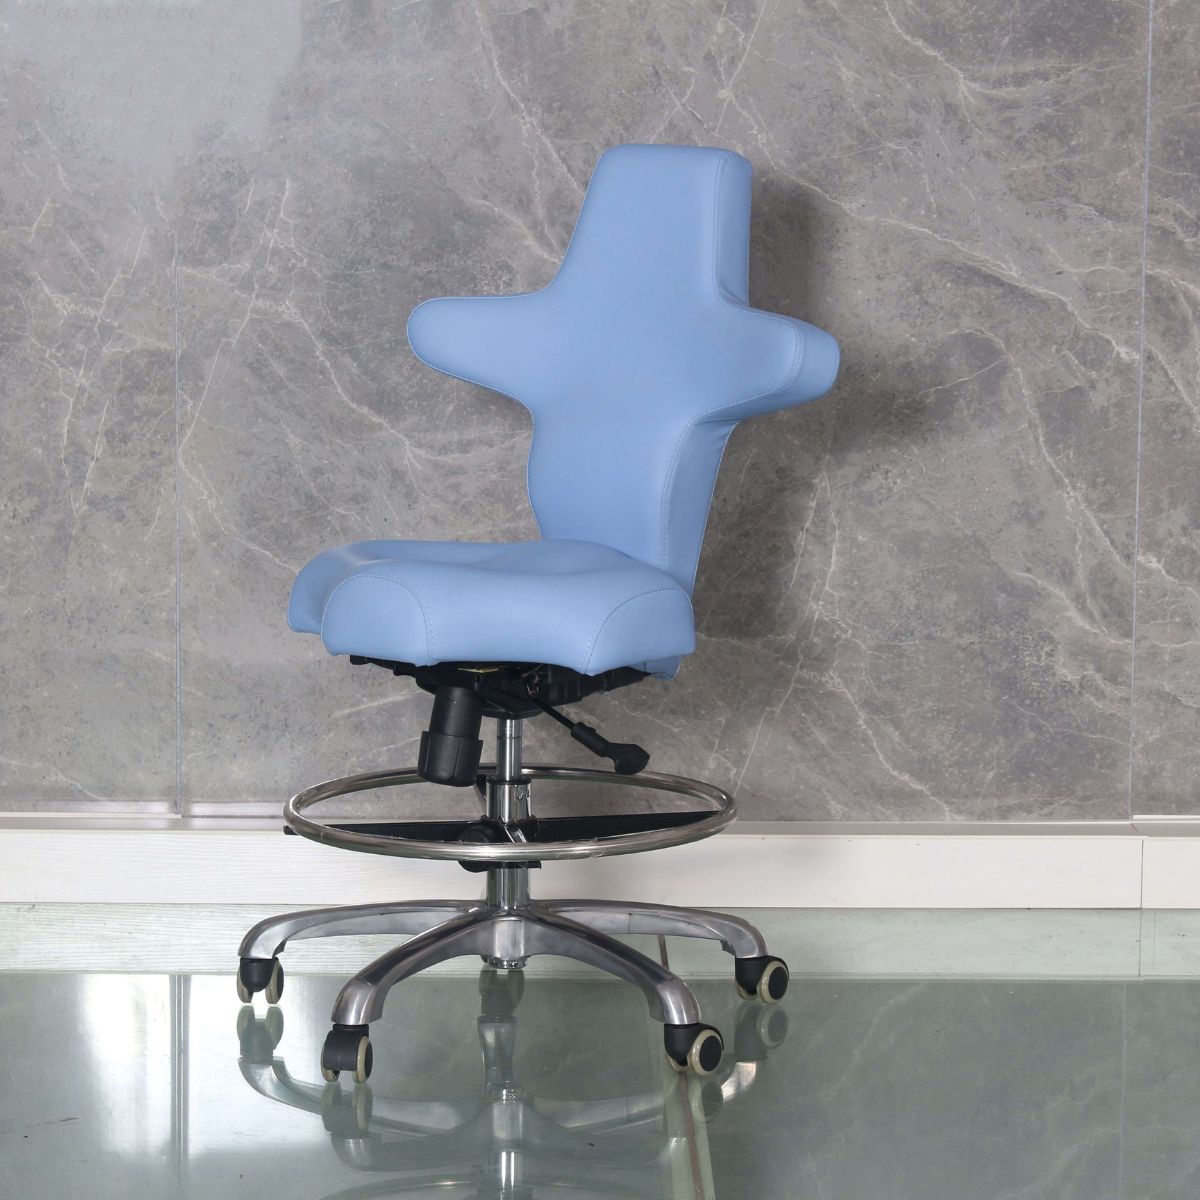 Sit Healthier Ergonomic Medical or Dental Operator Chair with Concave Backrest and Footrest